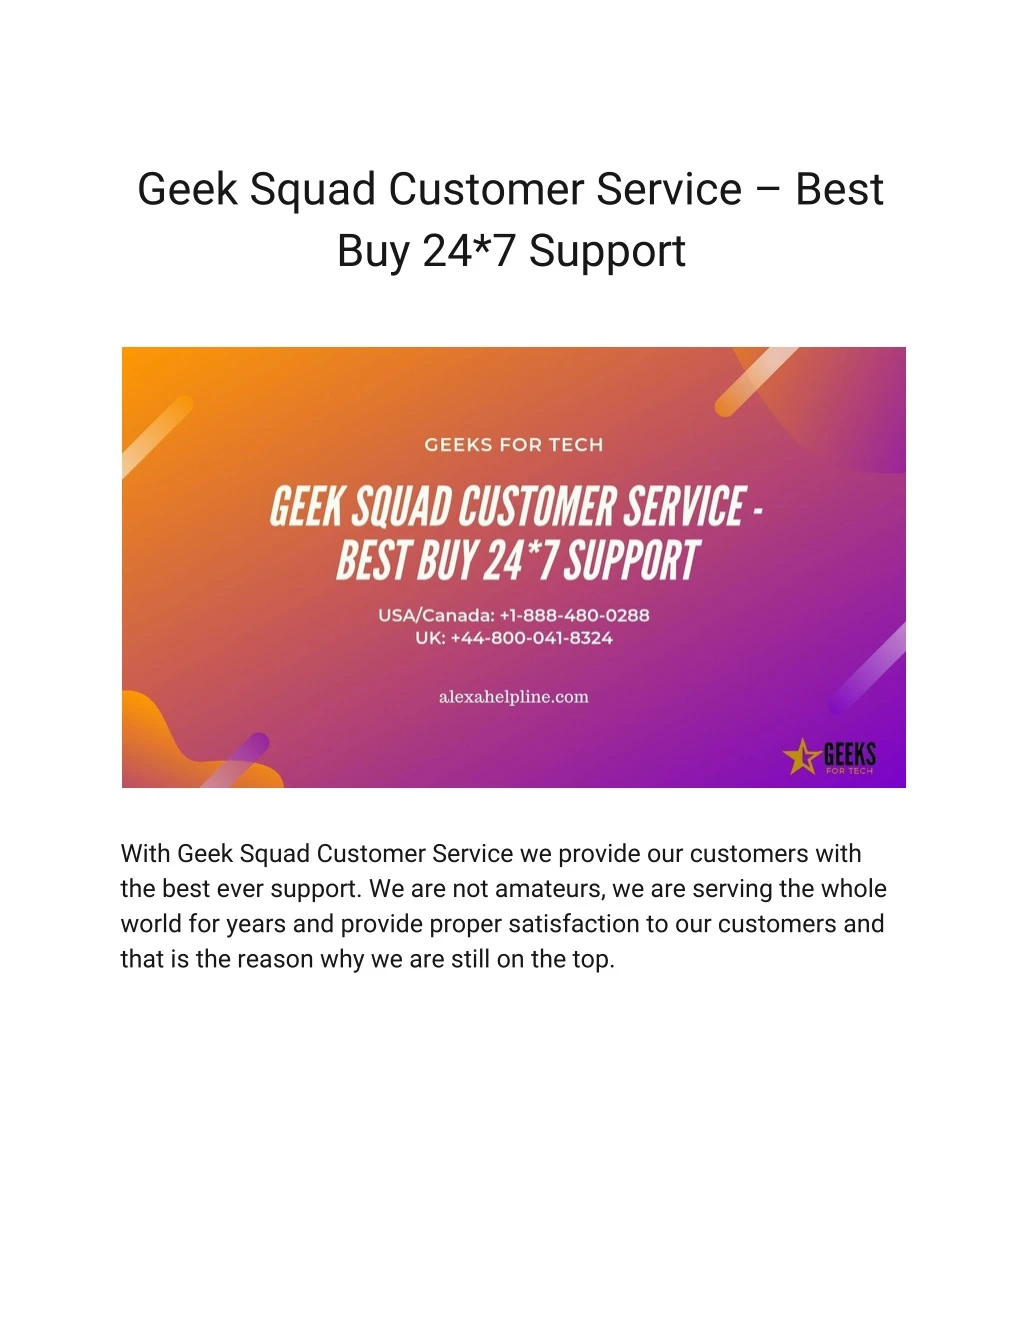 geek squad customer service best buy 24 7 support